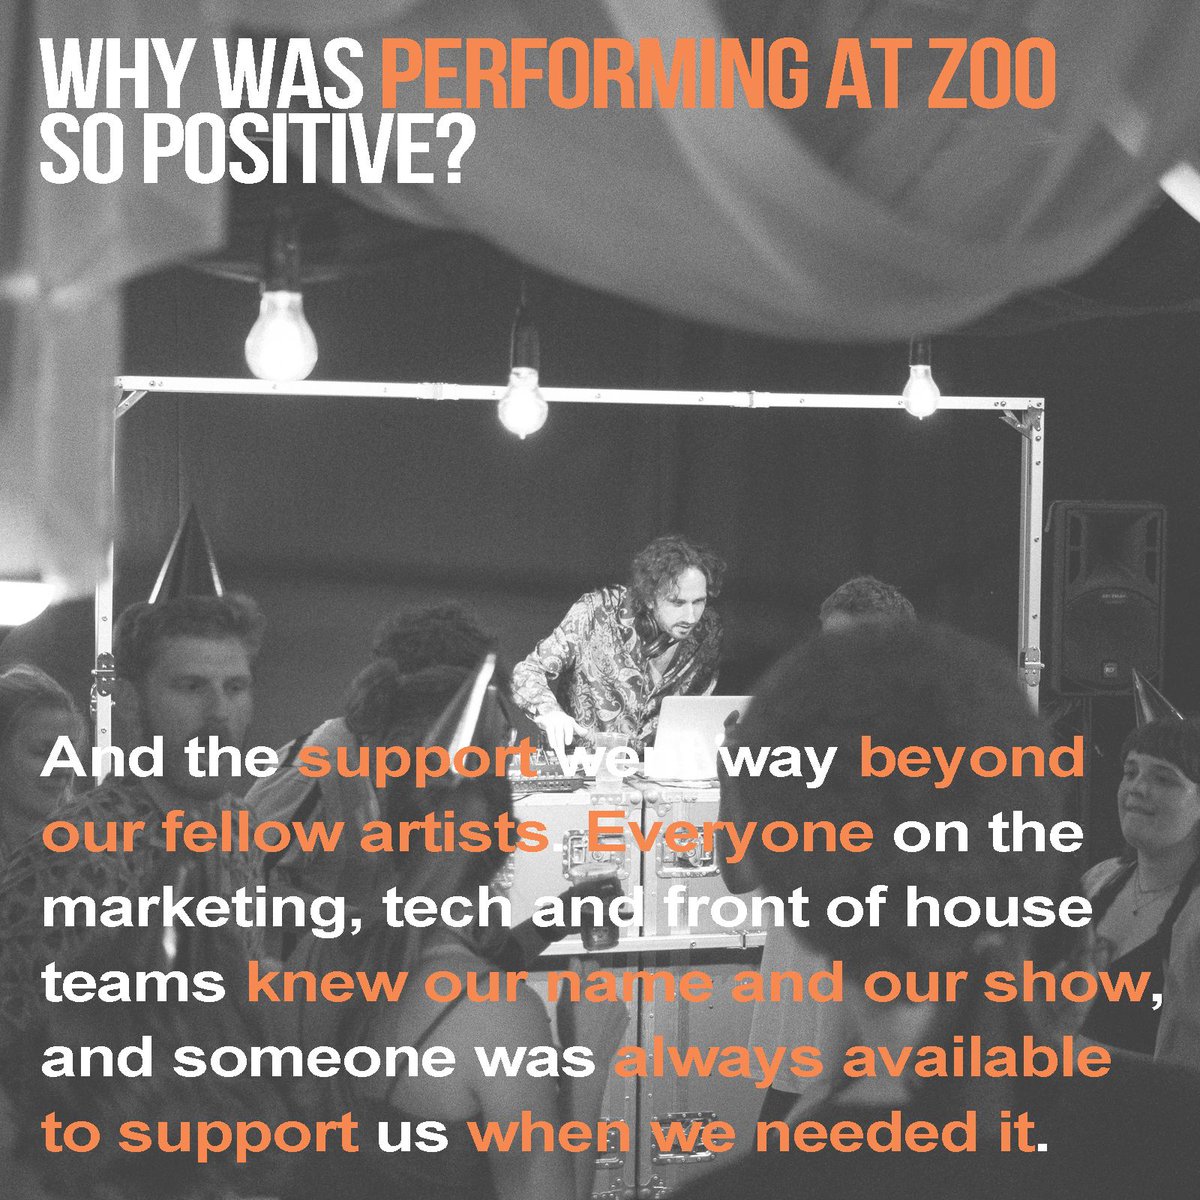 If you're thinking of bringing brilliant #theatre #dance or #circus to #edfringe - here's @920Collective on their experience with Certain Death and Other Considerations at ZOO Playground last year, and why you should join us #ZOO24 More Info & Apply via zoovenues.co.uk